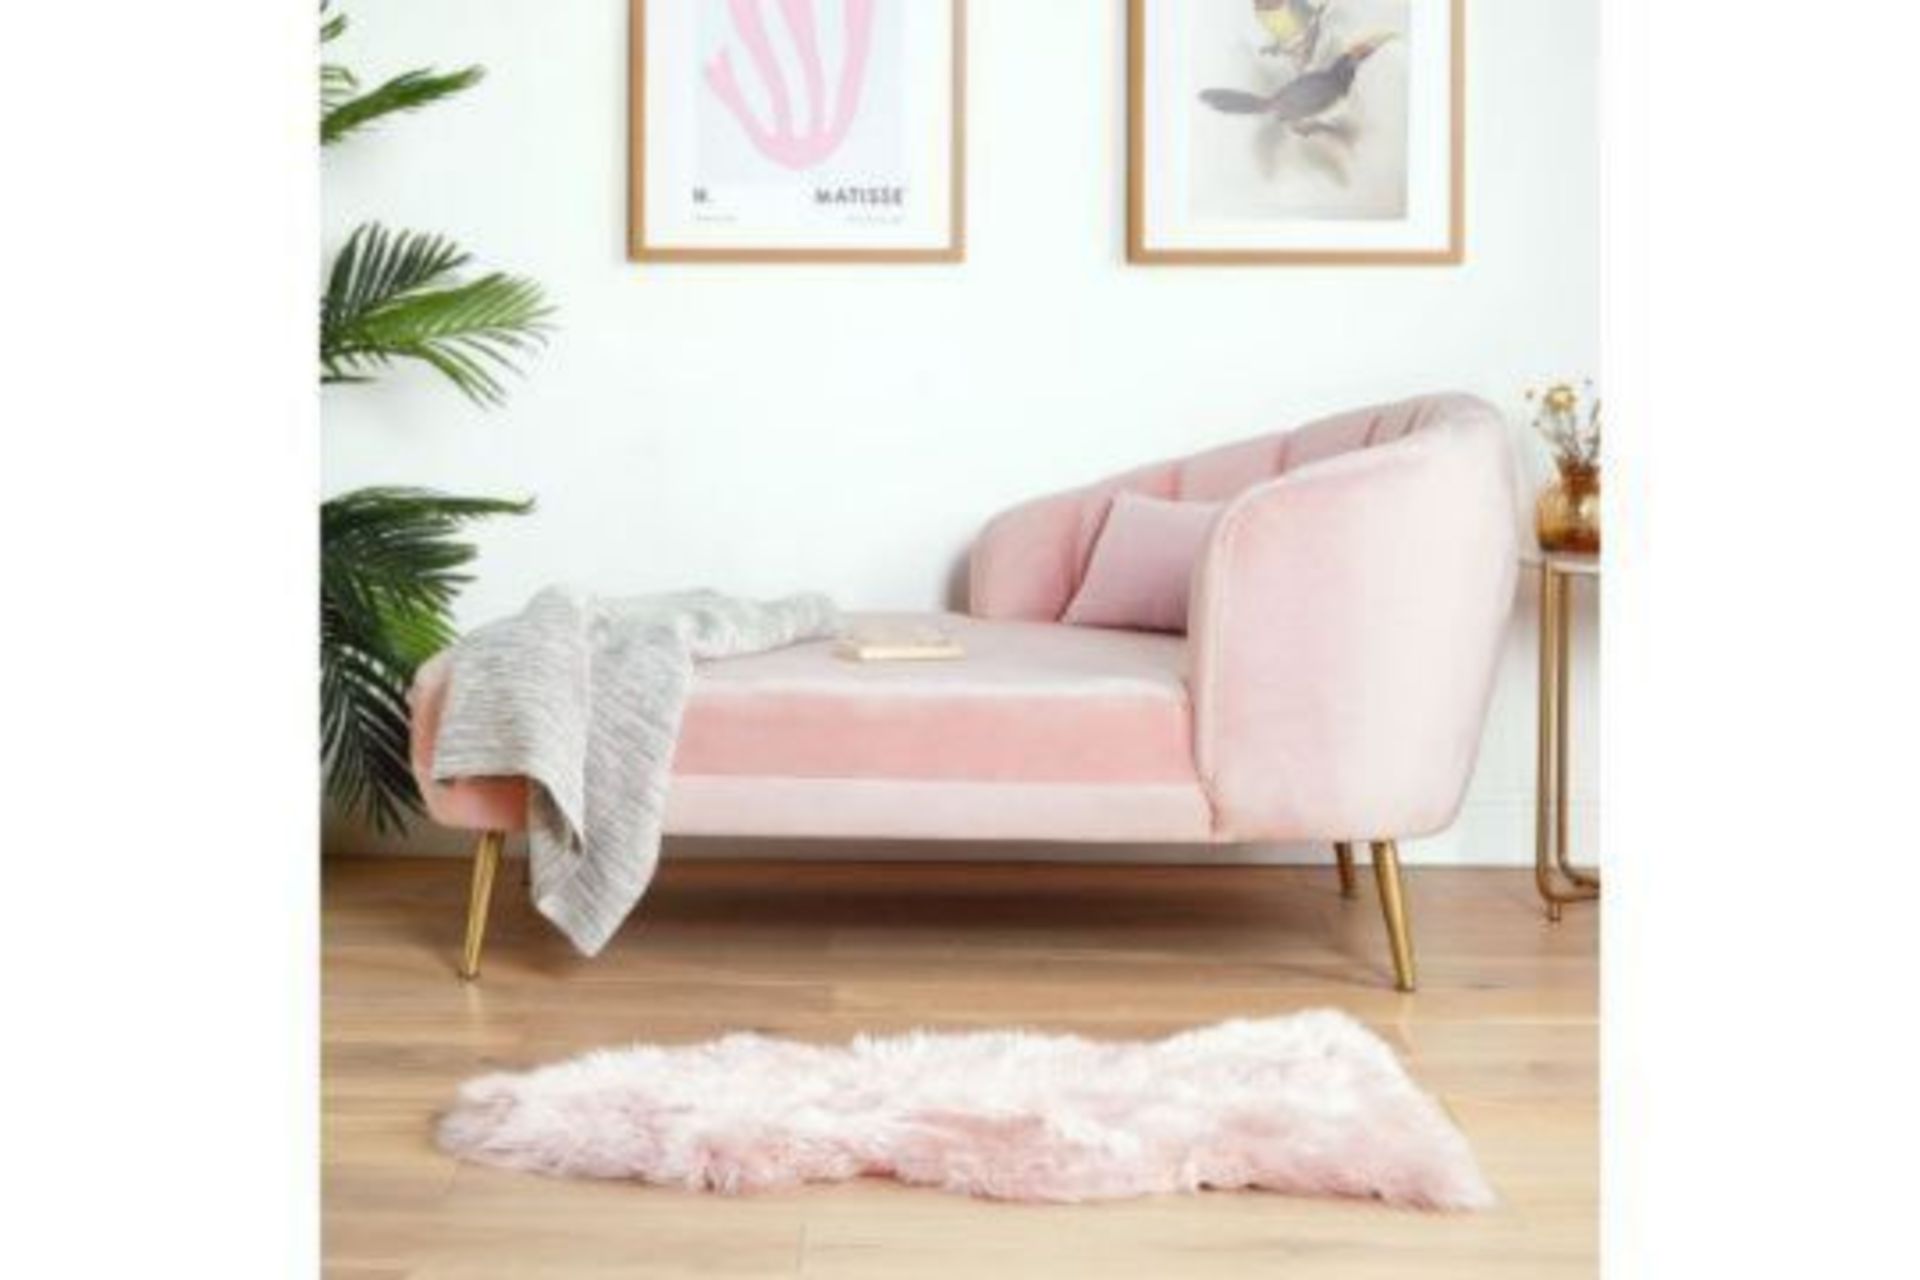 Pink Velvet Chaise Longue with Metal Legs. RRP £449.99. (REF322 J/ST) Introduce our Pink Chaise